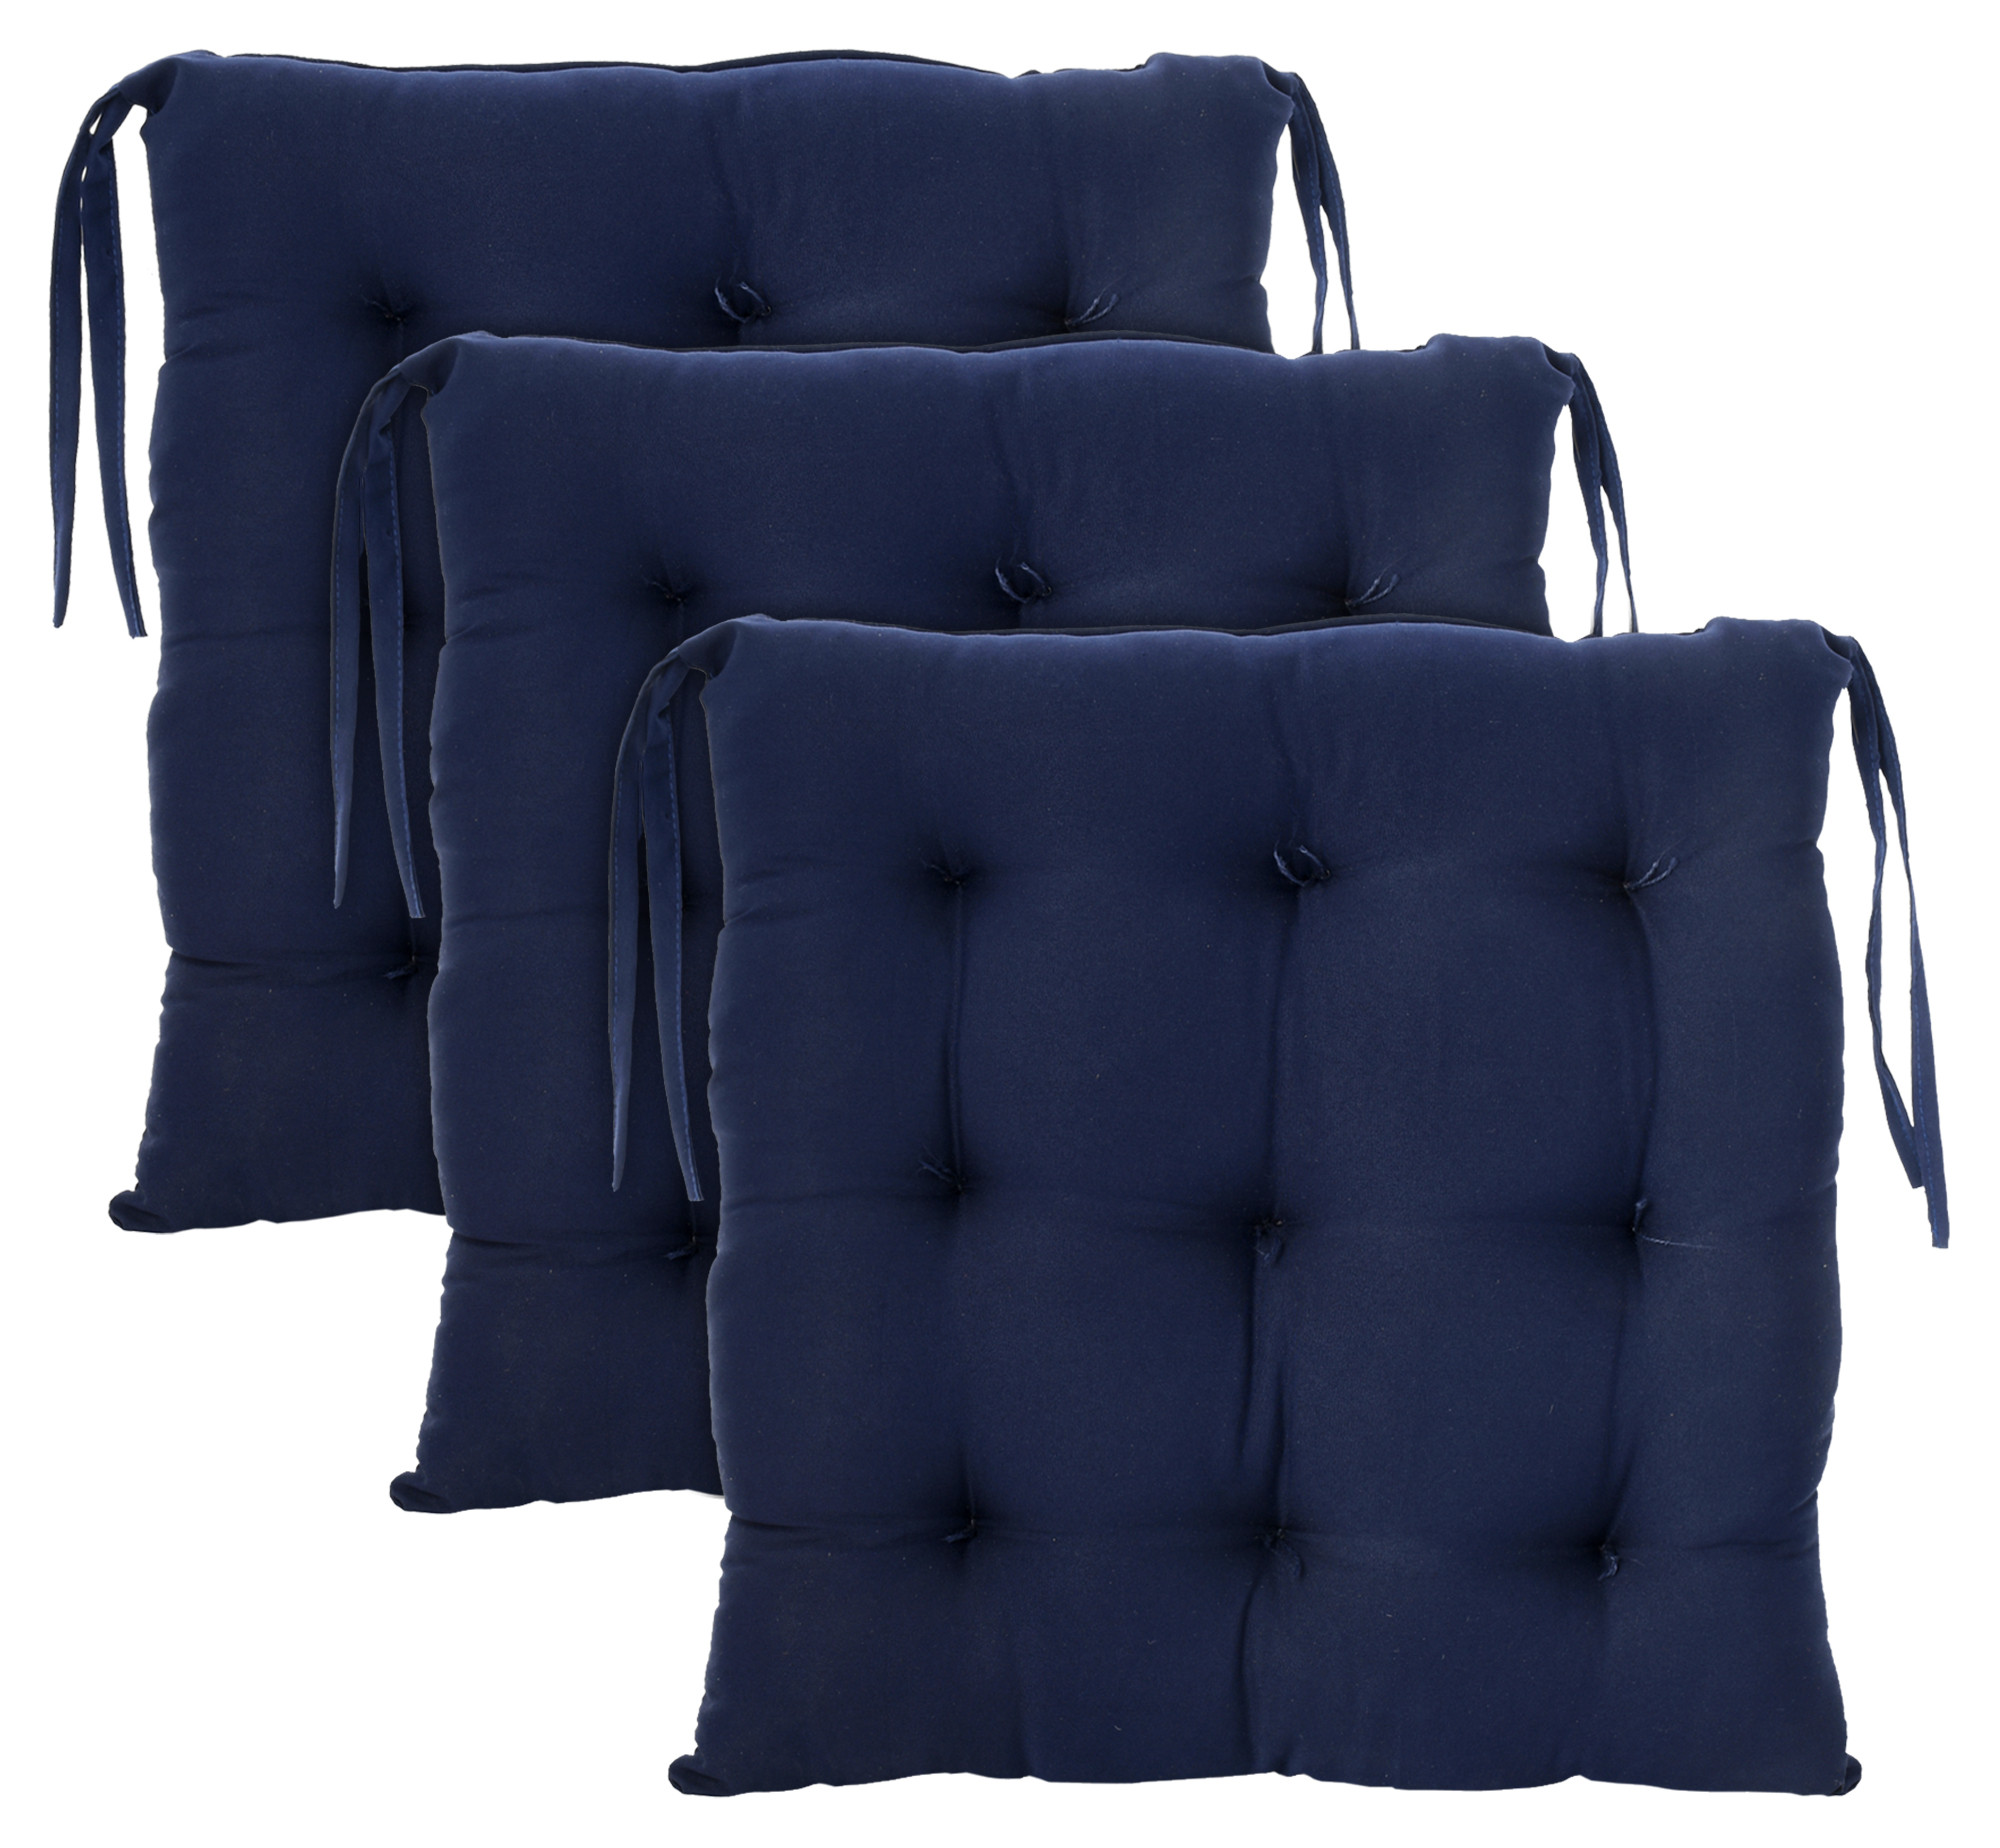 Kuber Industries Microfiber Square Chair Pad Seat Cushion For Car Pad, Office Chair, Indoor/Outdoor, Dining Living Room, Kitchen With Ties, 18*18 Inch (Navy Blue)